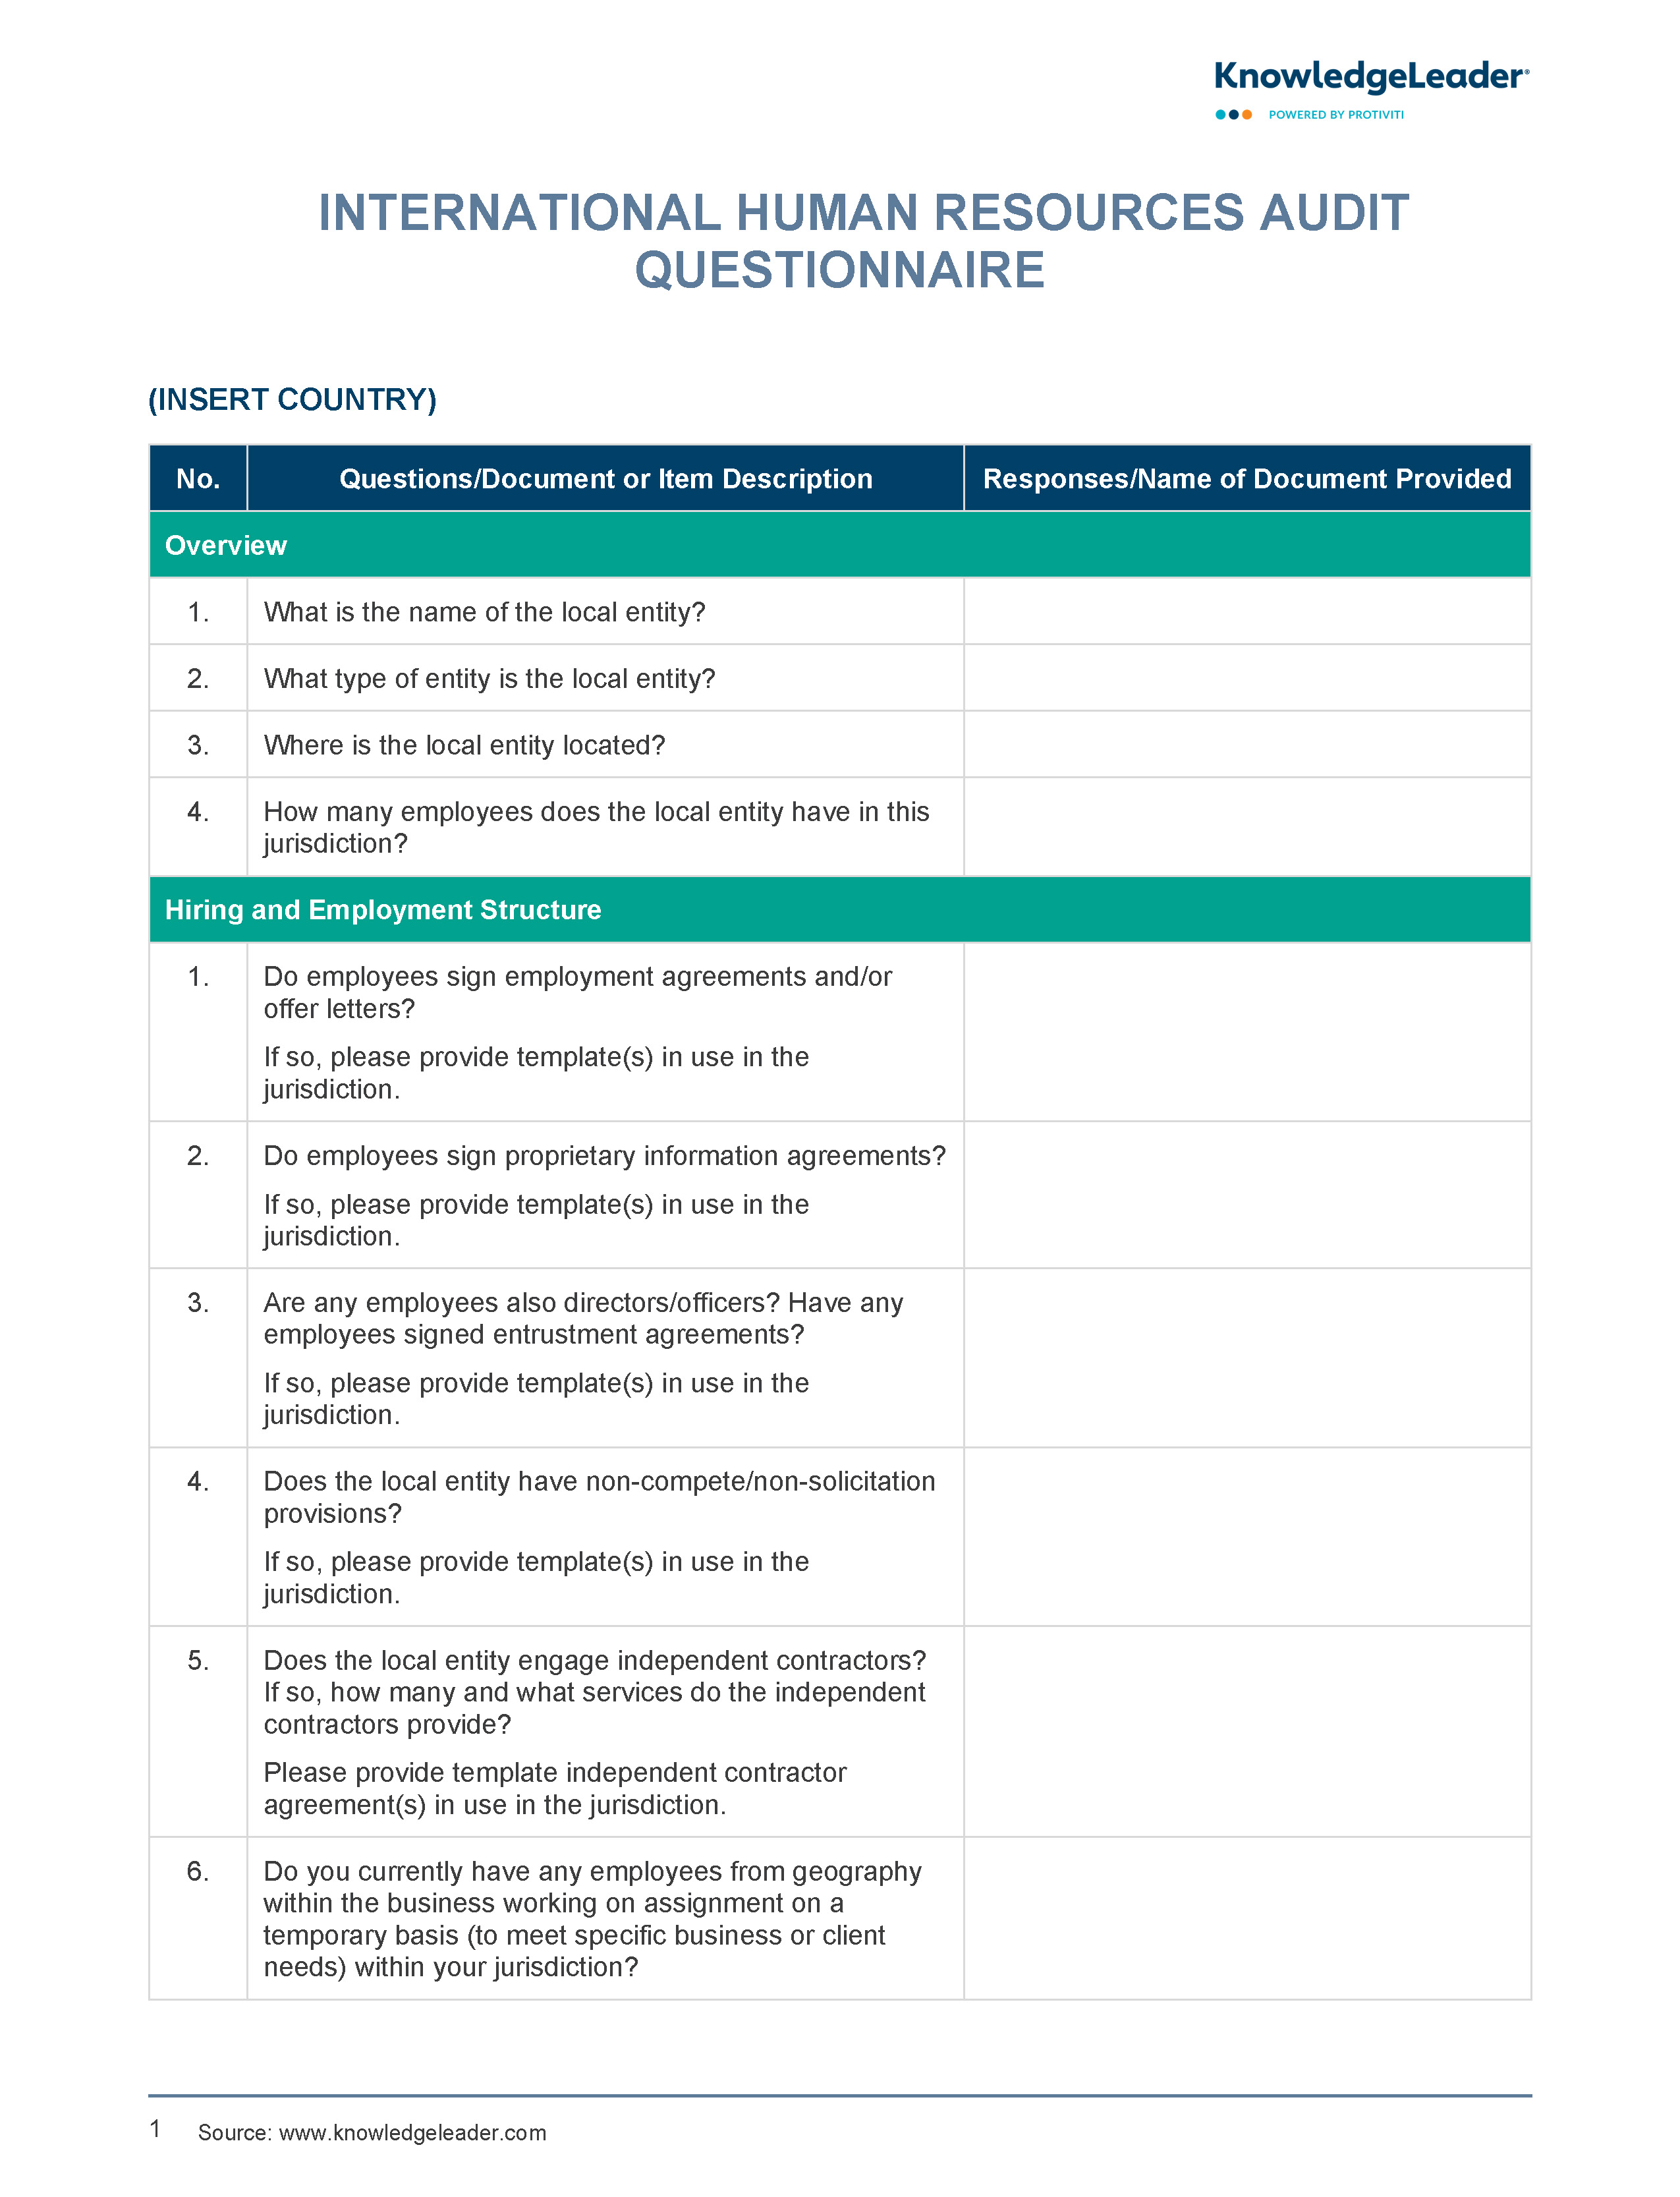 Screenshot of the first page of International Human Resources Audit Questionnaire